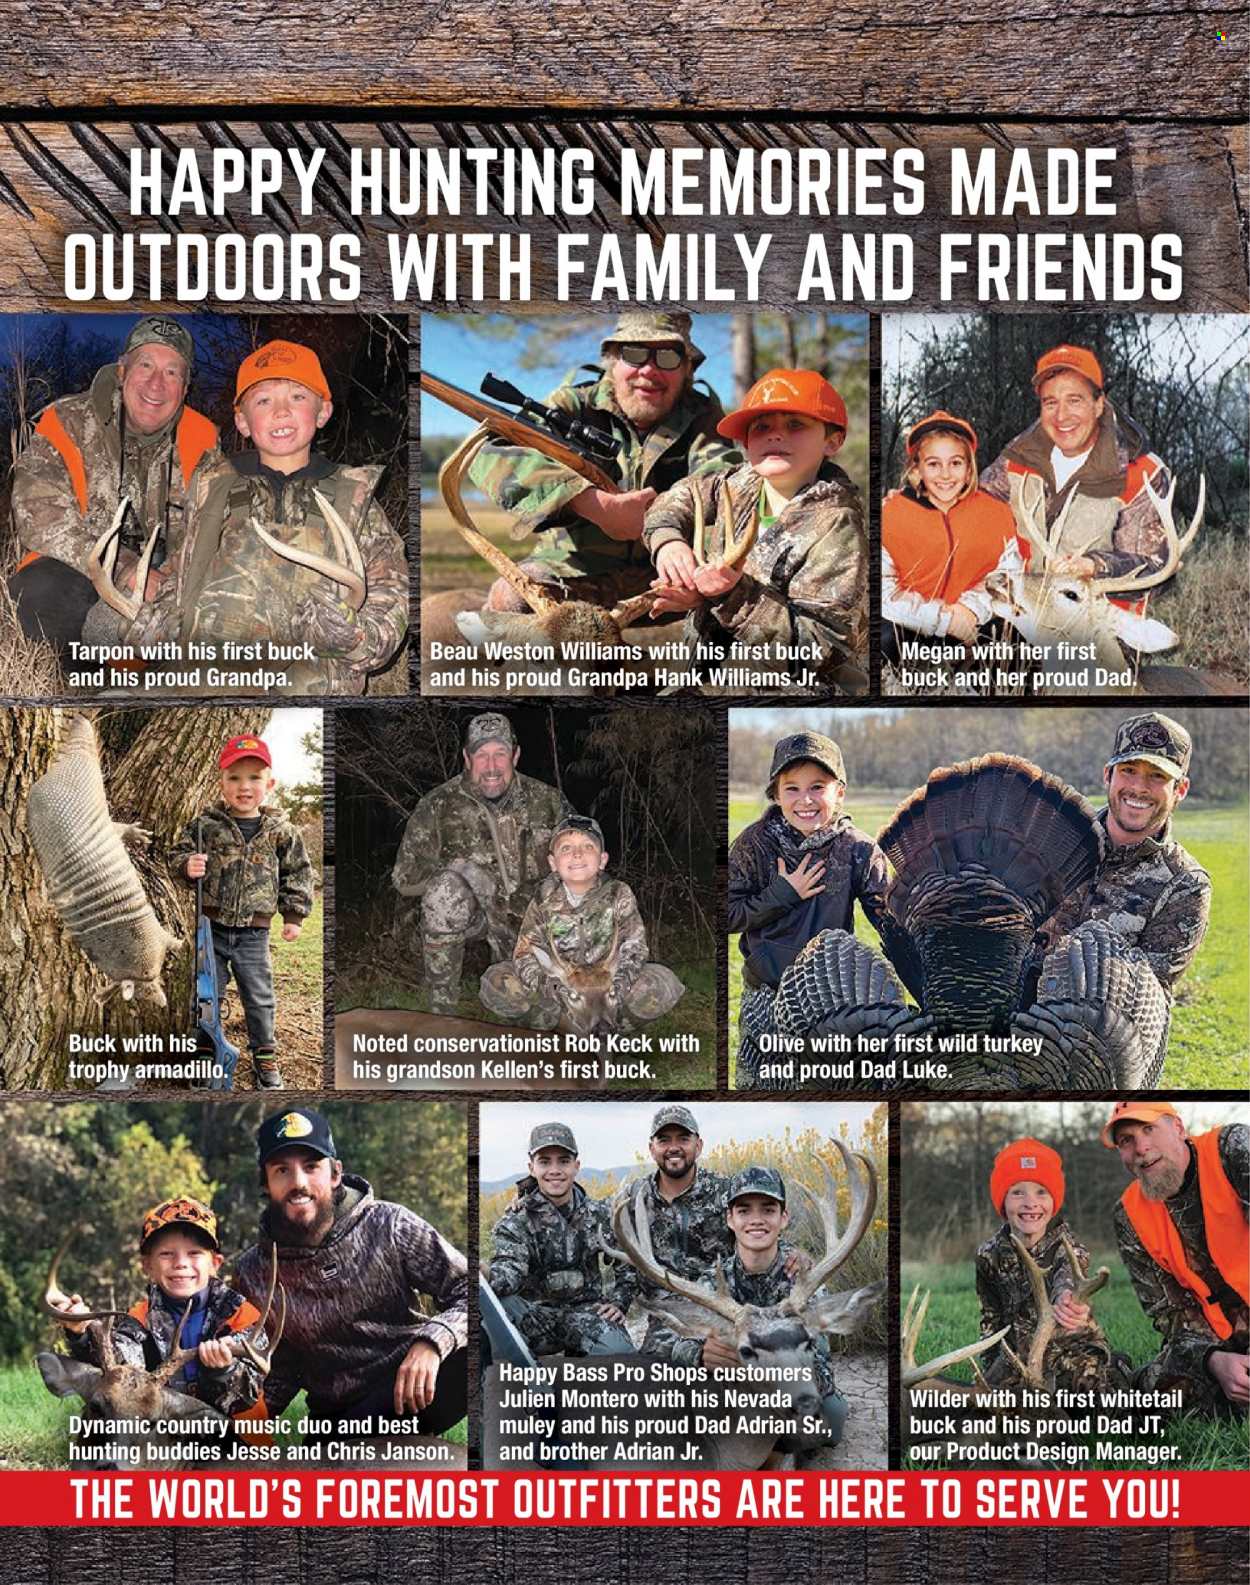 Bass Pro Shops flyer . Page 3.